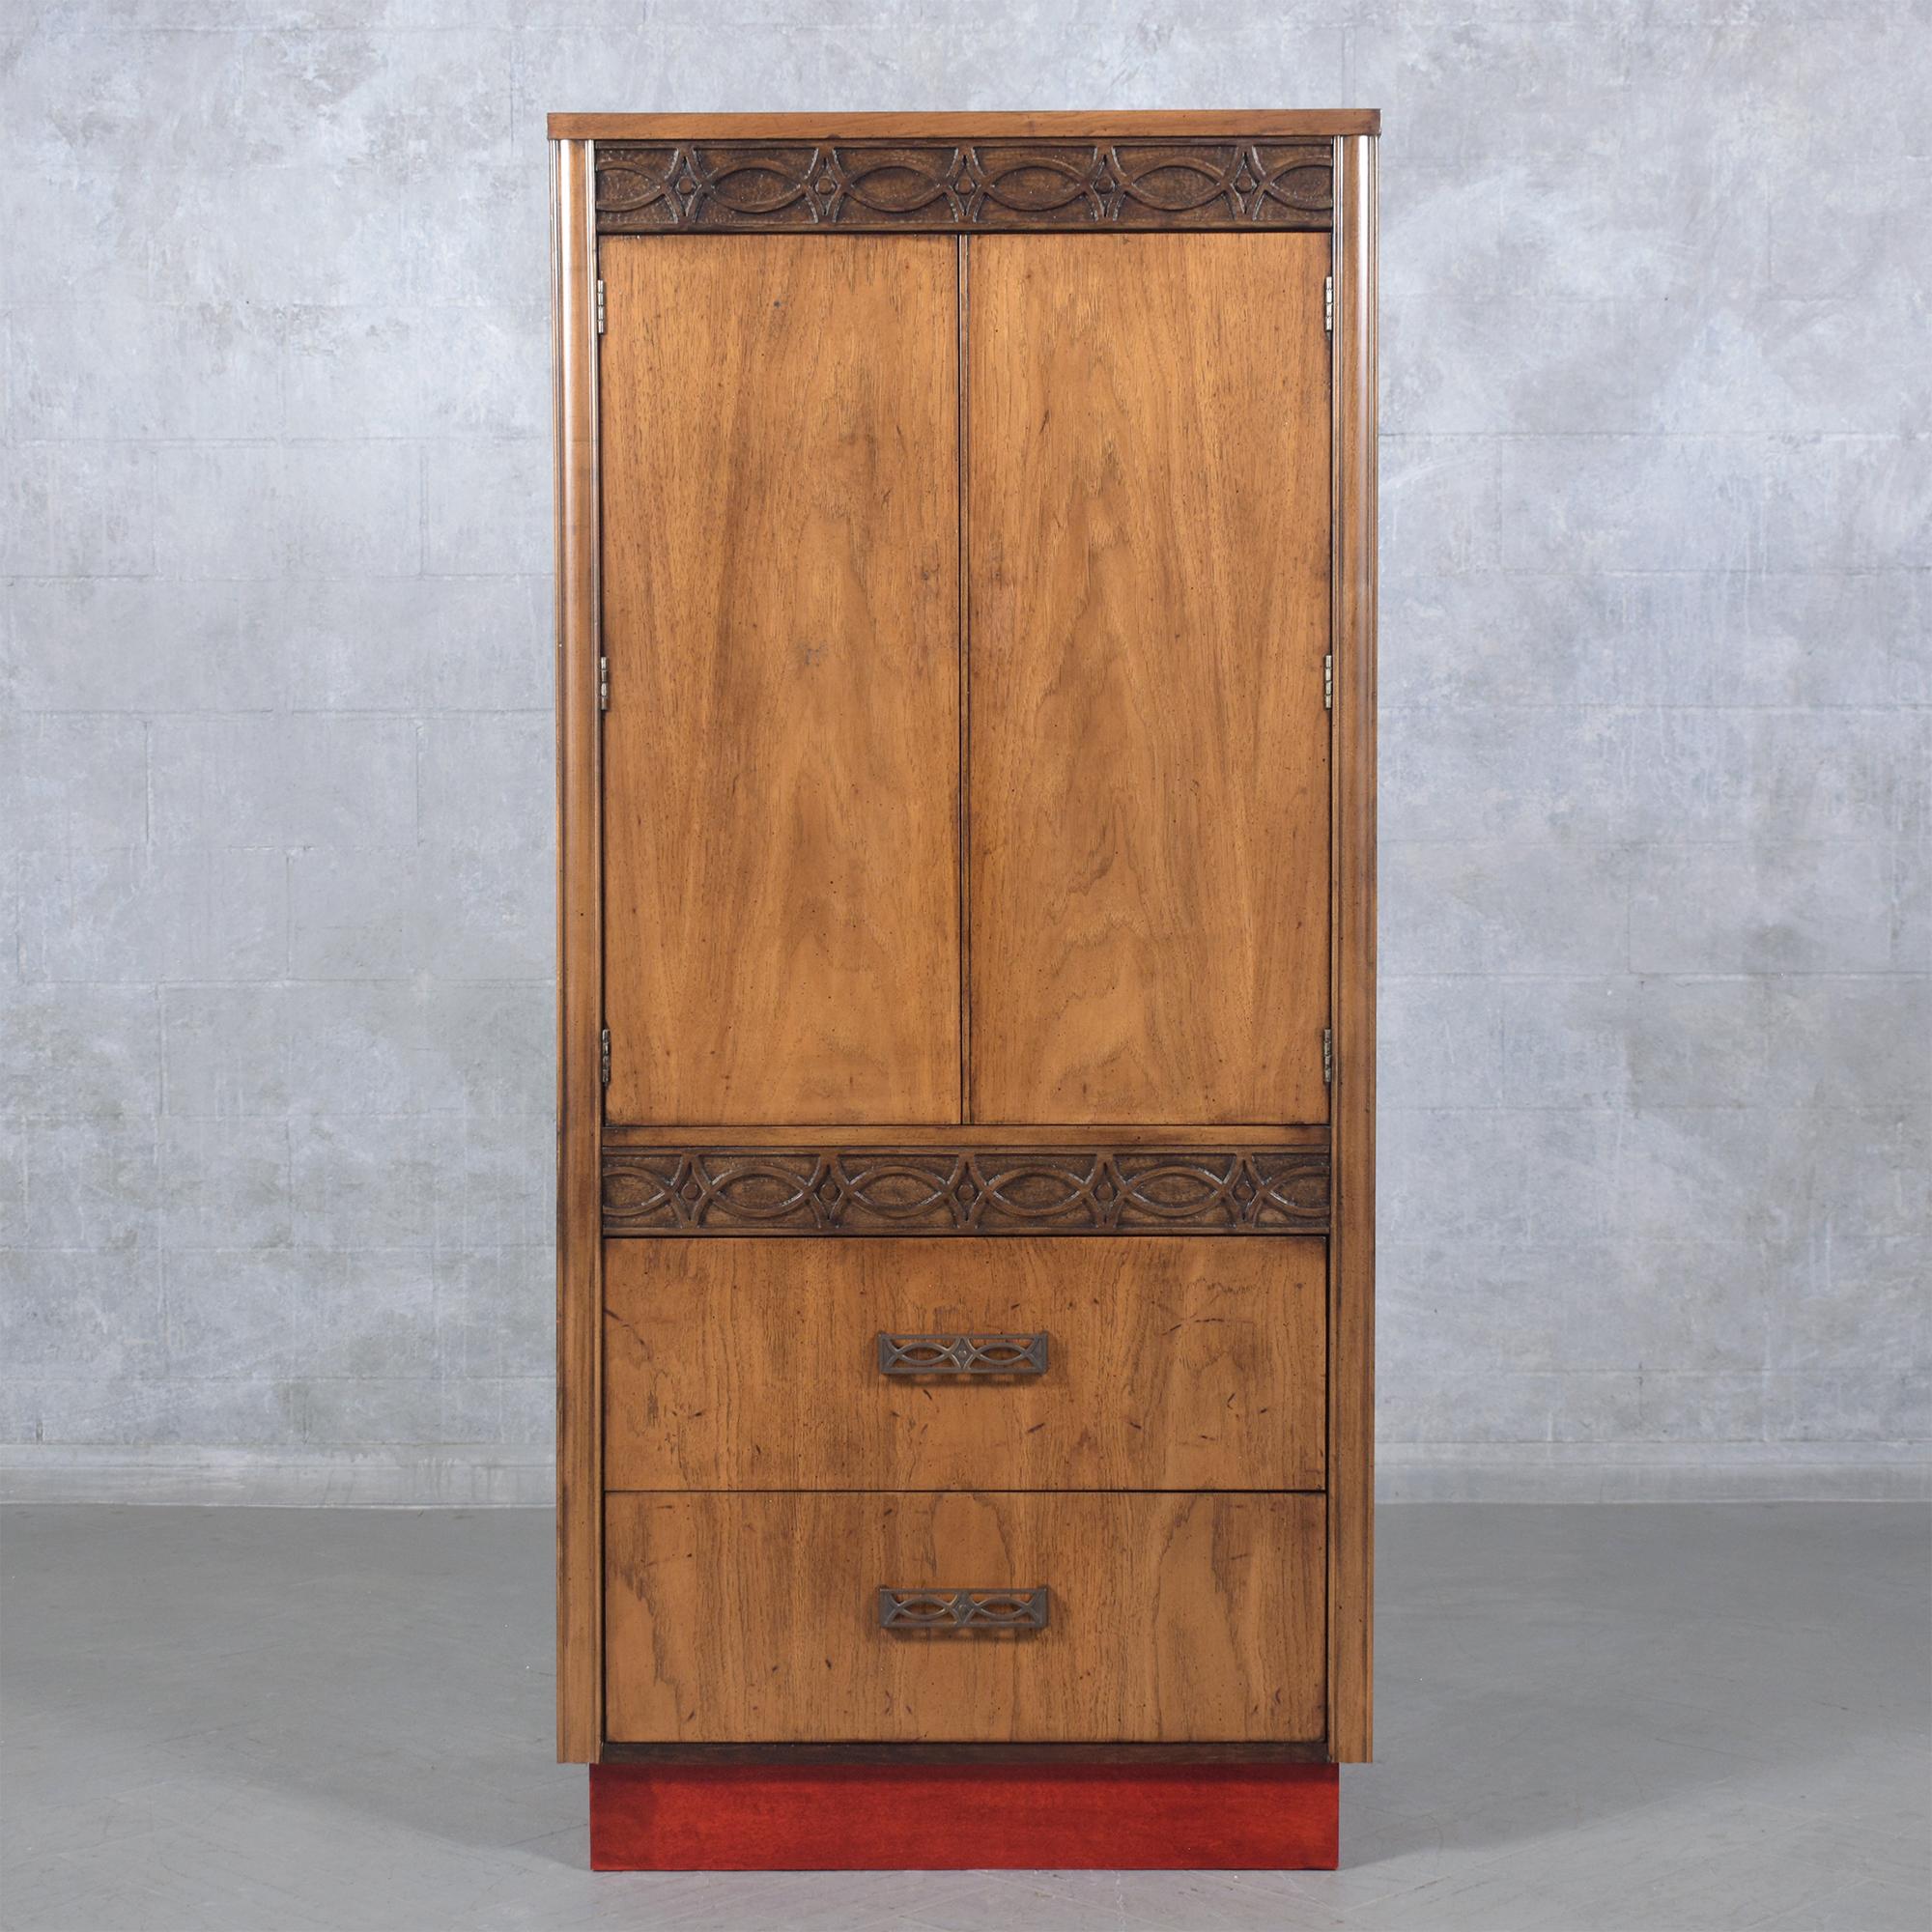 Discover the elegance and functional design of our 1960s Mid-Century Modern Bachelor Chest of Drawers. Expertly hand-crafted from premium walnut wood, this exquisite piece has undergone a thorough restoration to bring its vintage charm into the